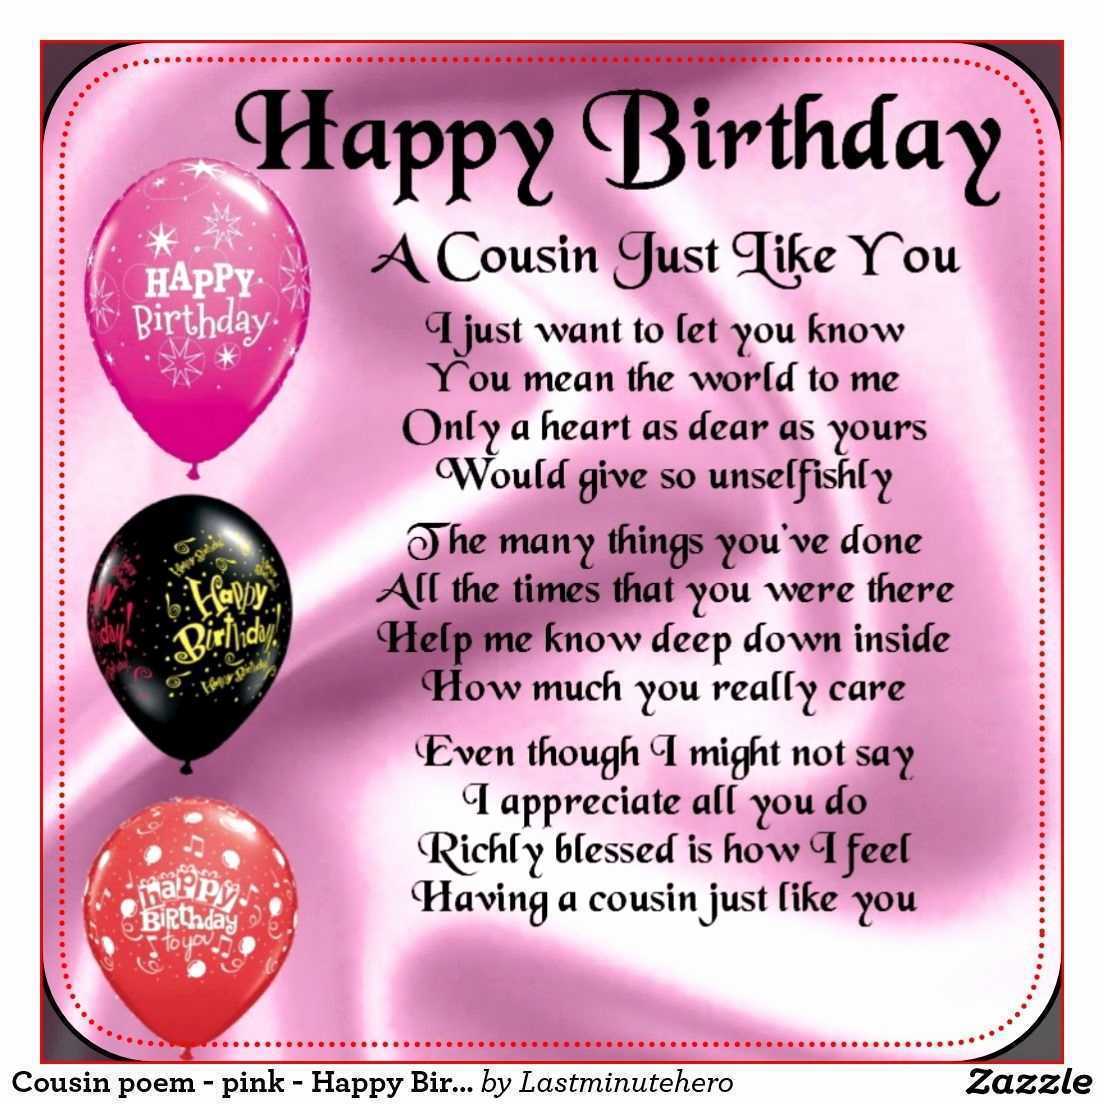 Happy birthday images For Cousin💐 Free Beautiful bday cards and